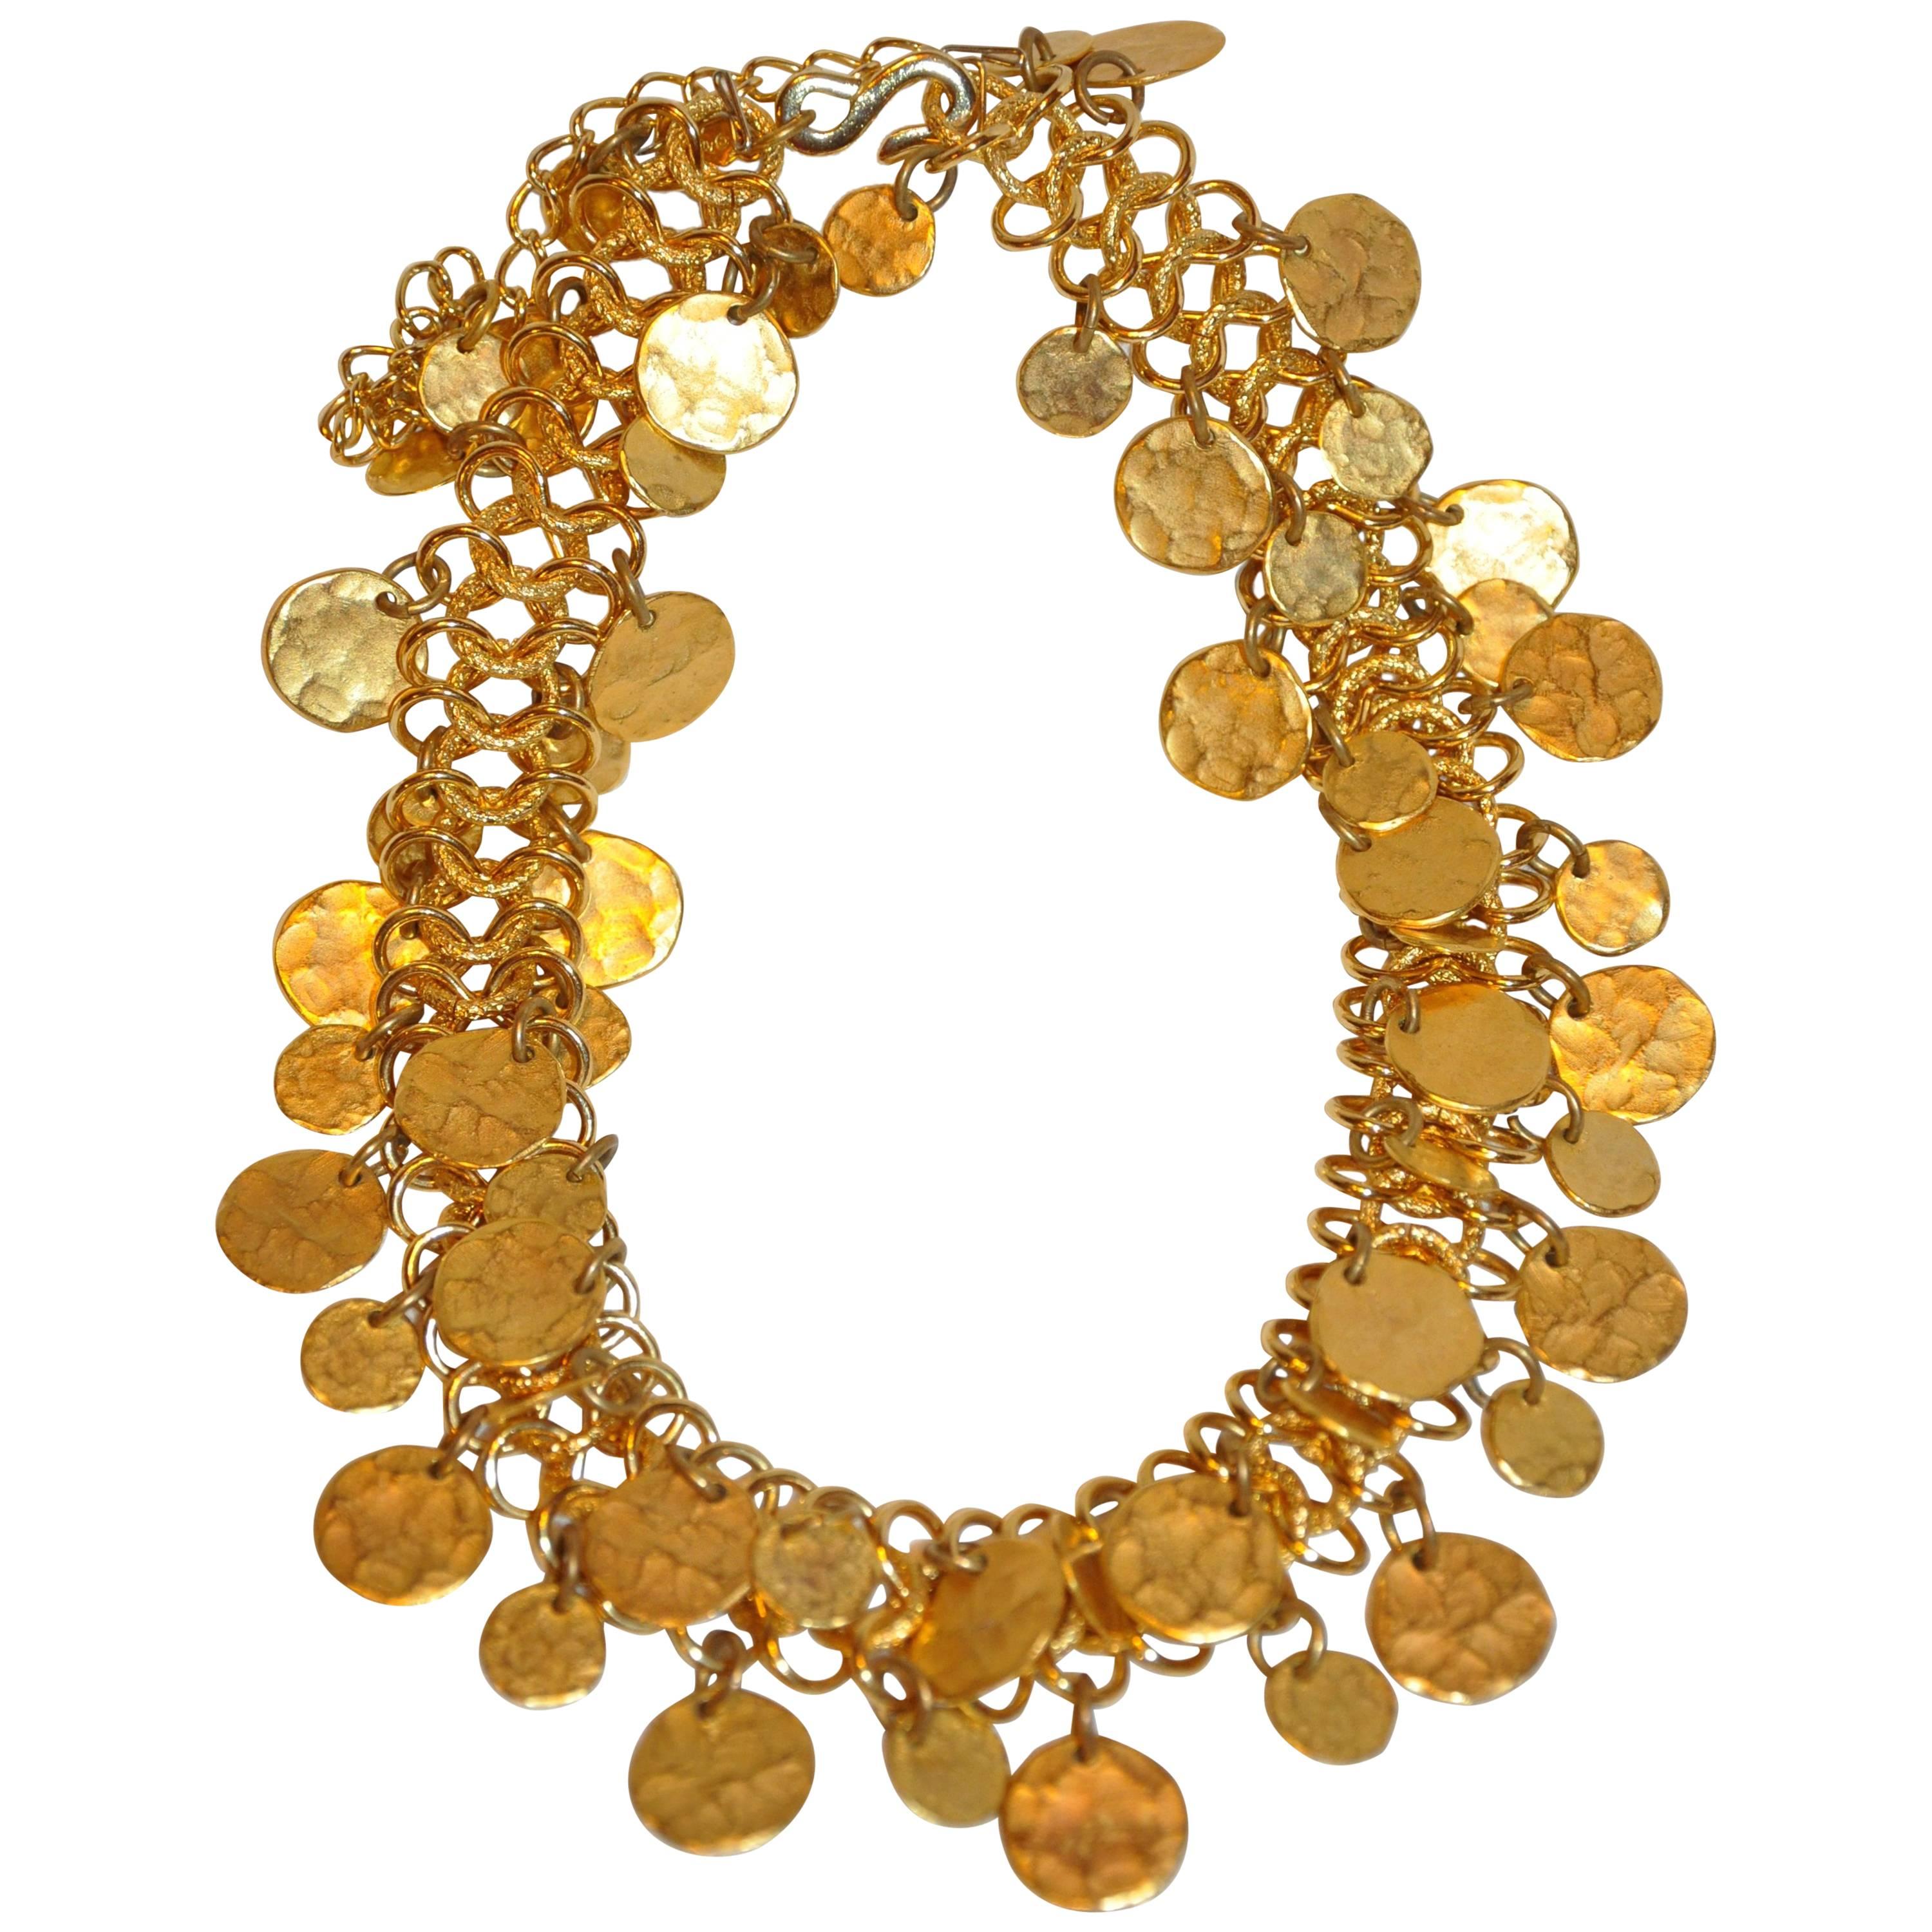 Kenneth Jay Lane Gilded Hammered Gold Multi-Disc Chain-Link Necklace